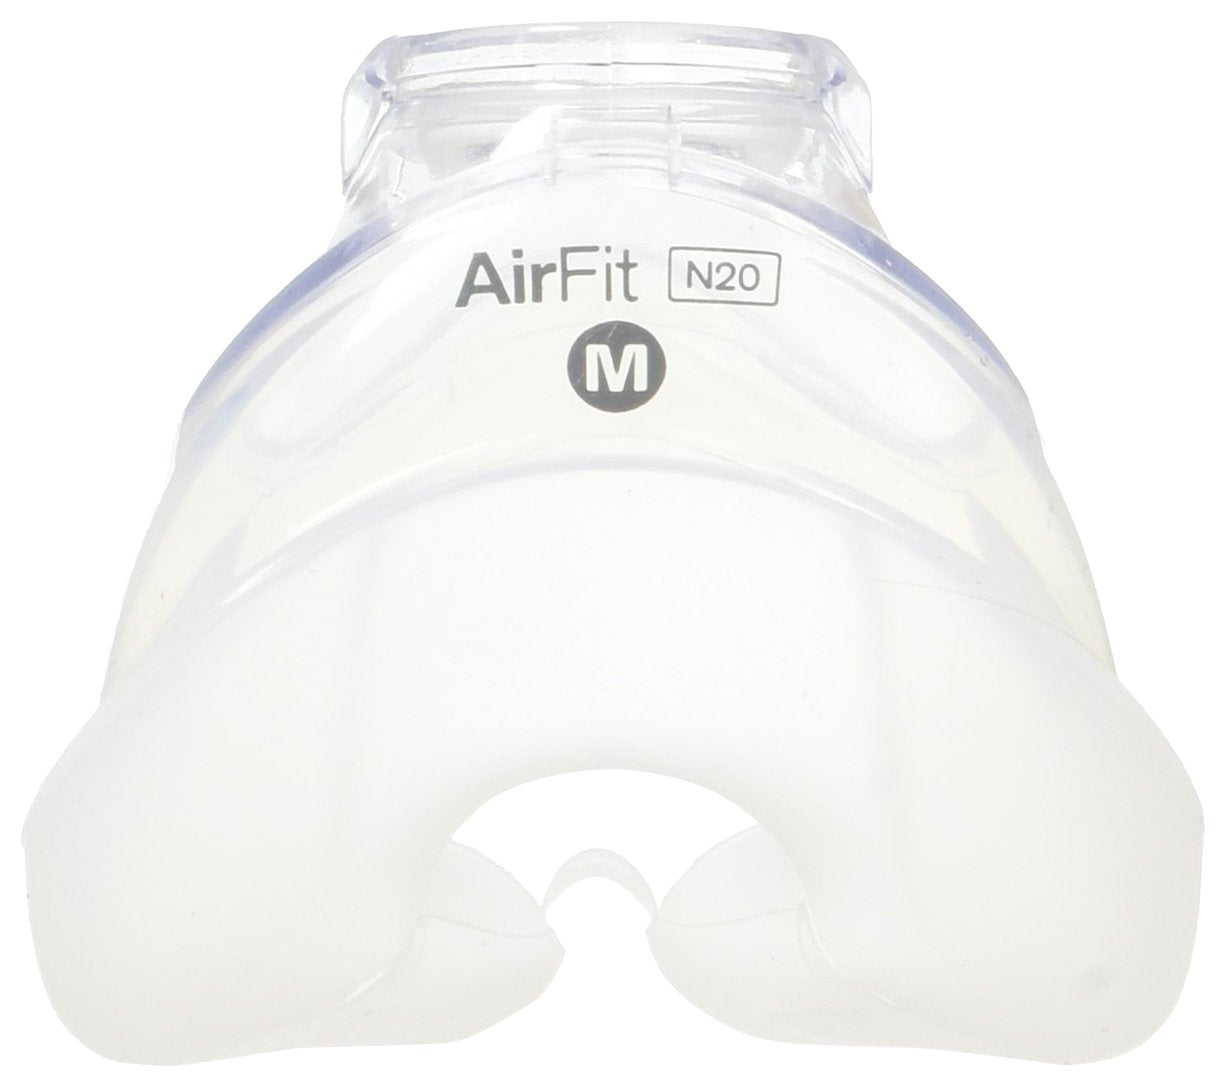 Top view of transparent silicone cushion for ResMed AirFit N20.